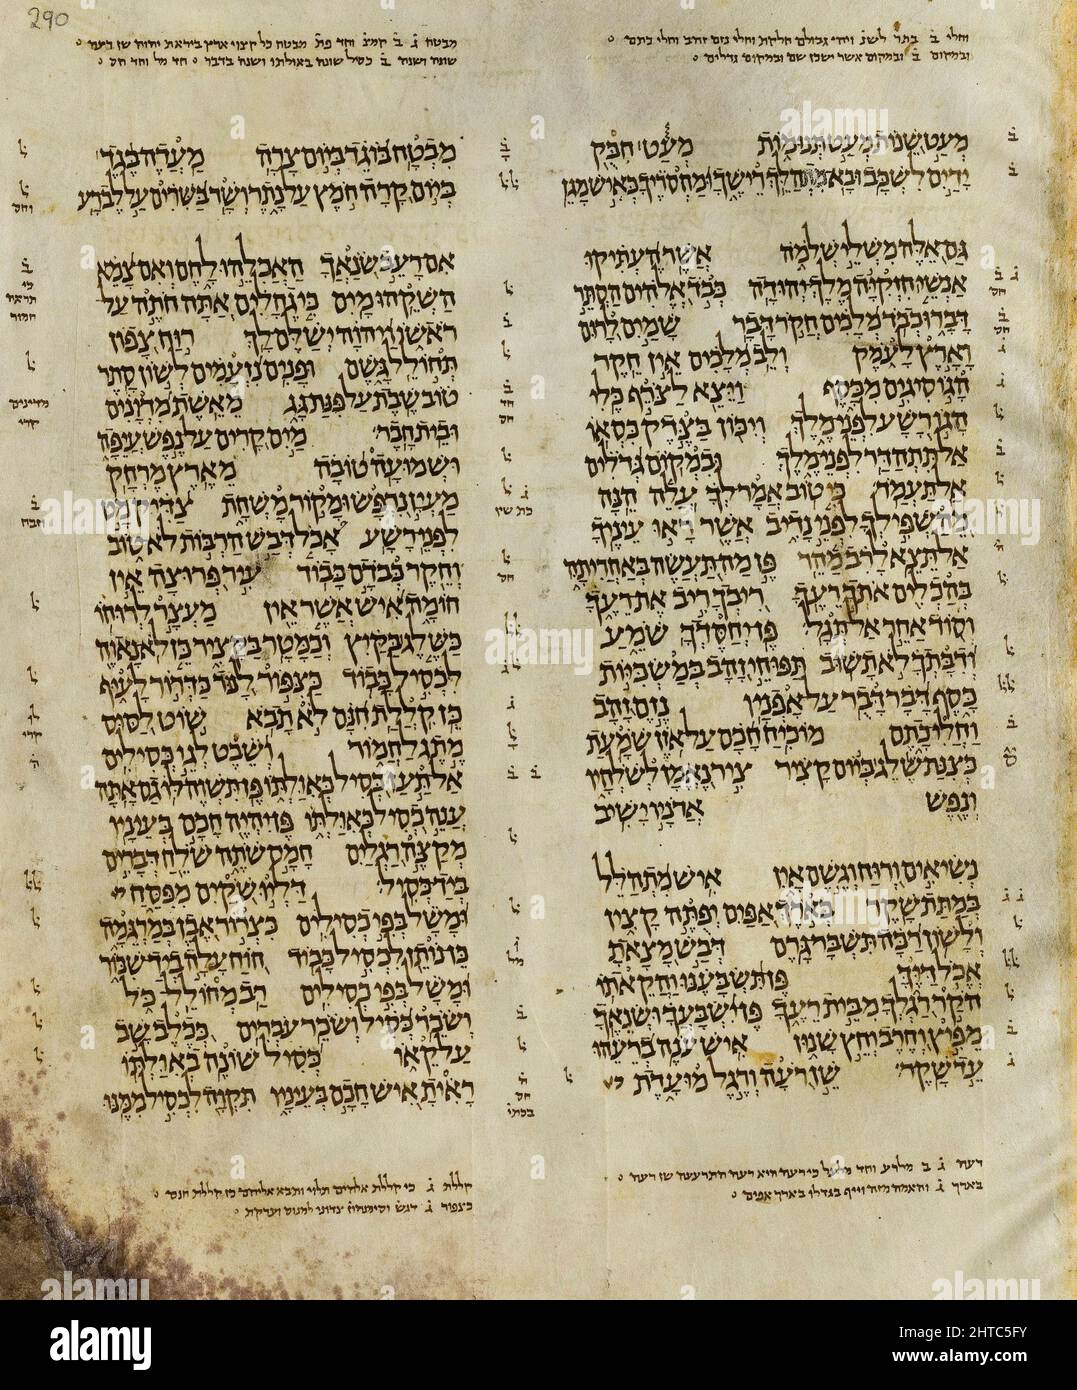 A Page from the Aleppo Codex. The Aleppo Codex (Crown of Aleppo) is a medieval bound manuscript of the Hebrew Bible. The codex was written in the city of Tiberias in the 10th century CE (circa 920) under the rule of the Abbasid Caliphate, and was endorsed for its accuracy by Maimonides. Together with the Leningrad Codex, it contains the Ben-Asher masoretic tradition. The codex was kept for five centuries in the Central Synagogue of Aleppo, until the synagogue was torched during anti-Jewish riots in 1947. The fate of the codex during the subsequent decade is unclear: when it resurfaced in Israe Stock Photo